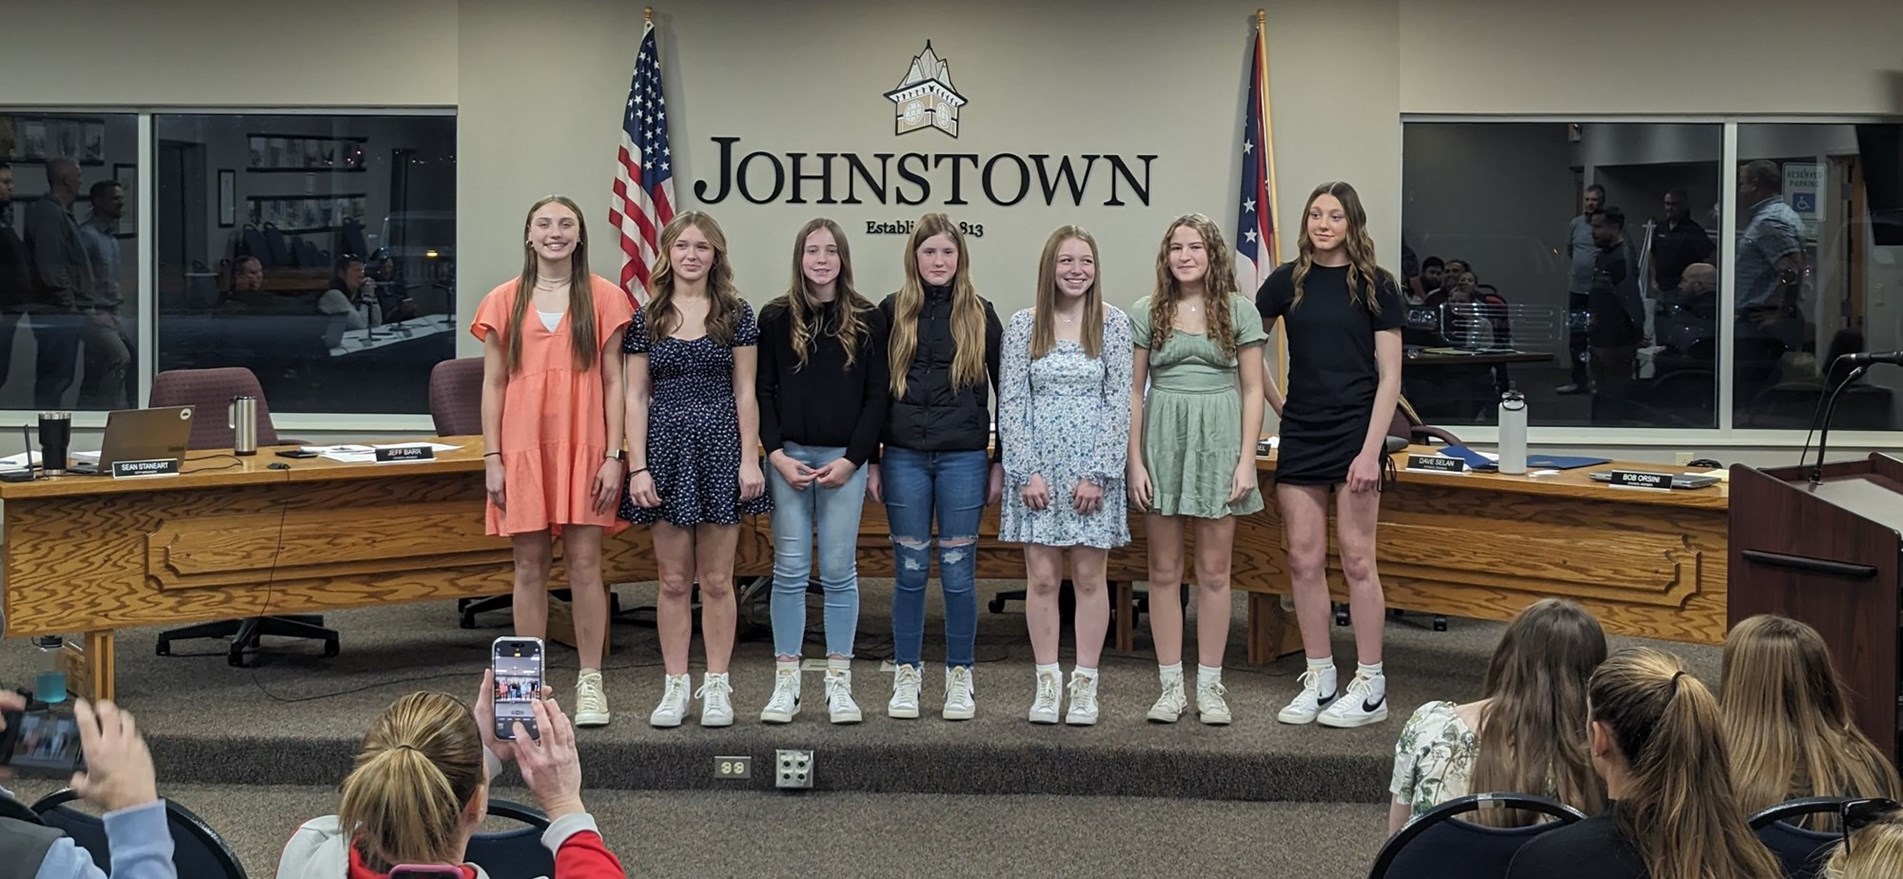 Johnstown Girls Basketball Coaches, Players gather in Council Chambers for recognition of Championship Season.